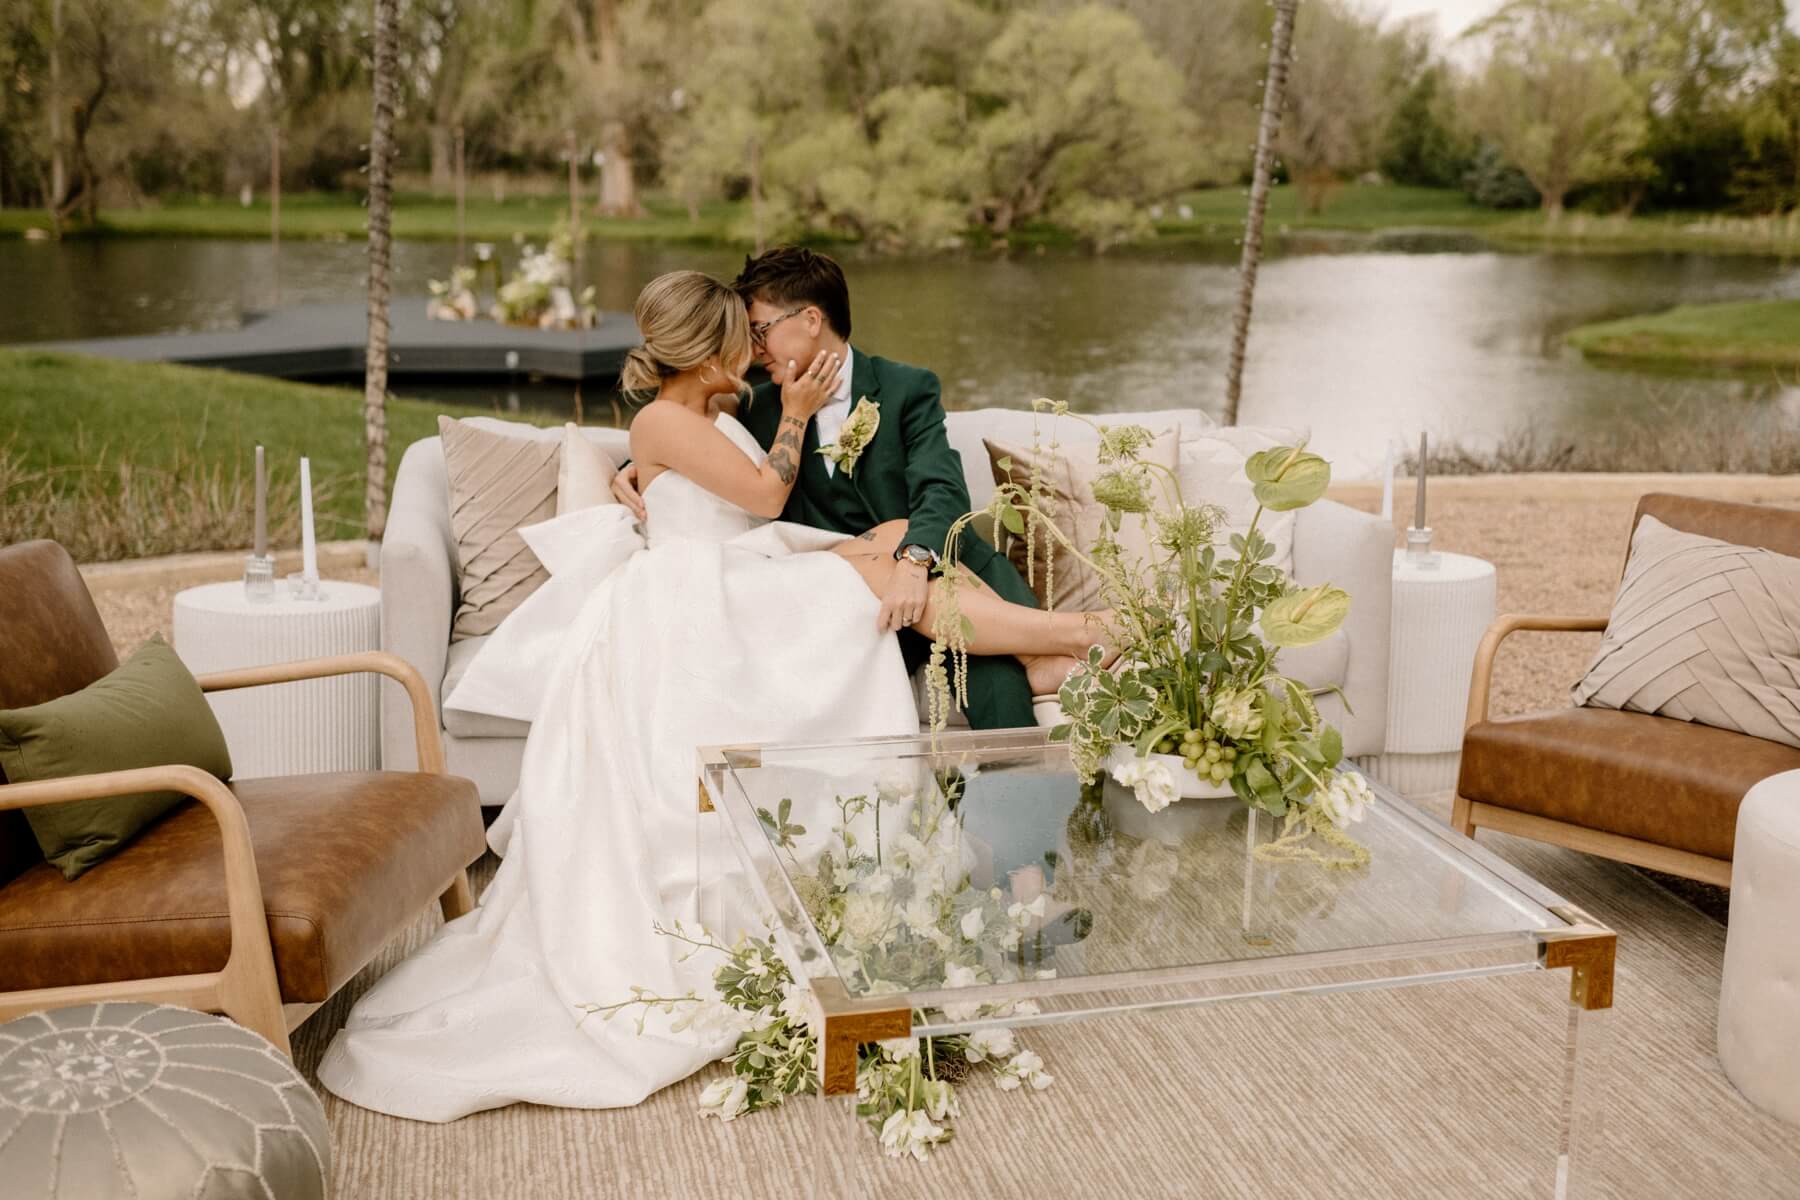 Partners sitting on lounge set with green and white wedding flowers in front of them